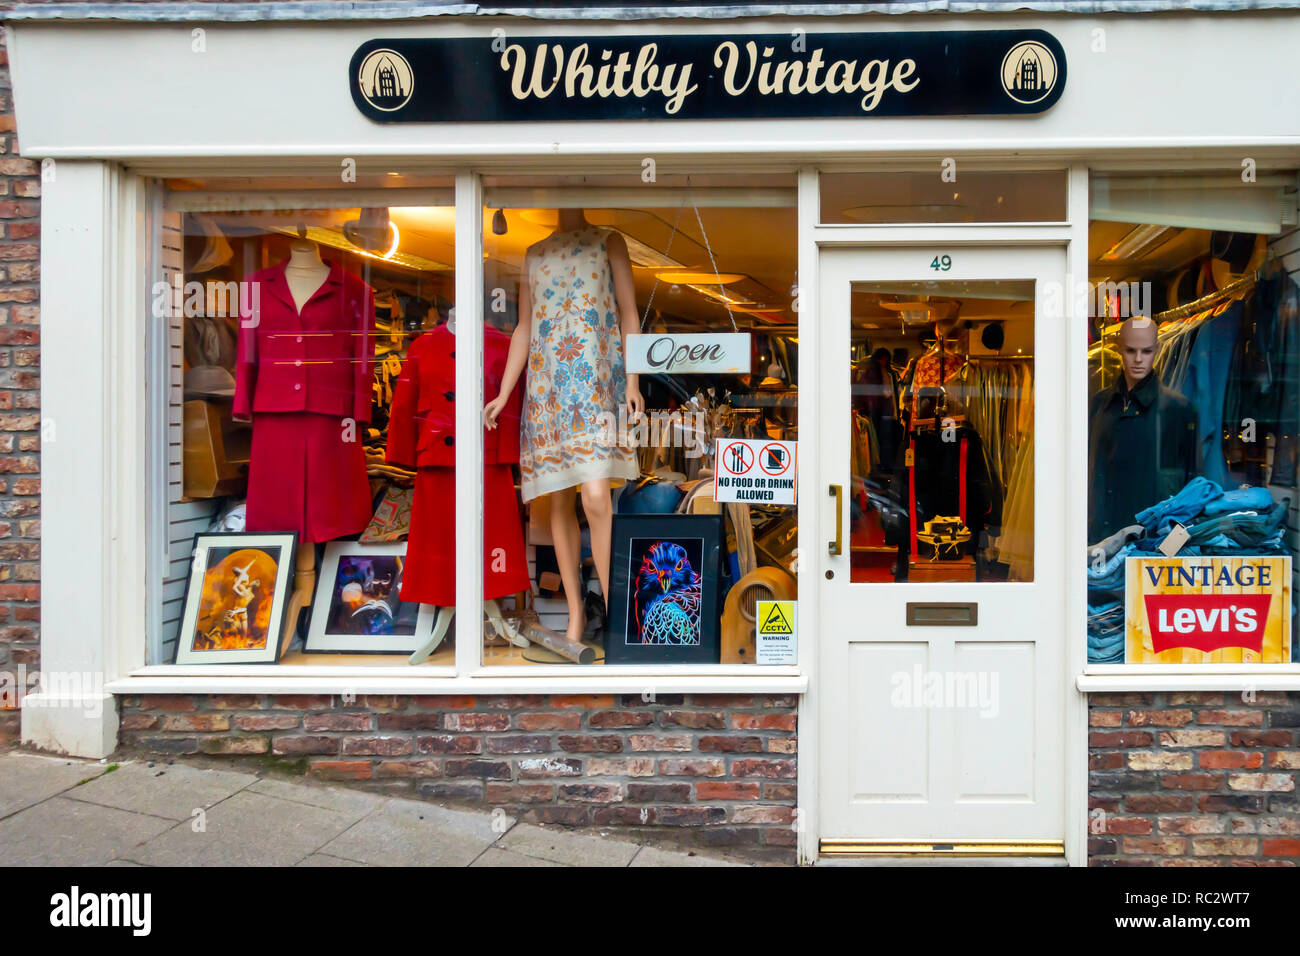 Whitby Vintage clothing selling second -hand smart designer clothing Stock Photo